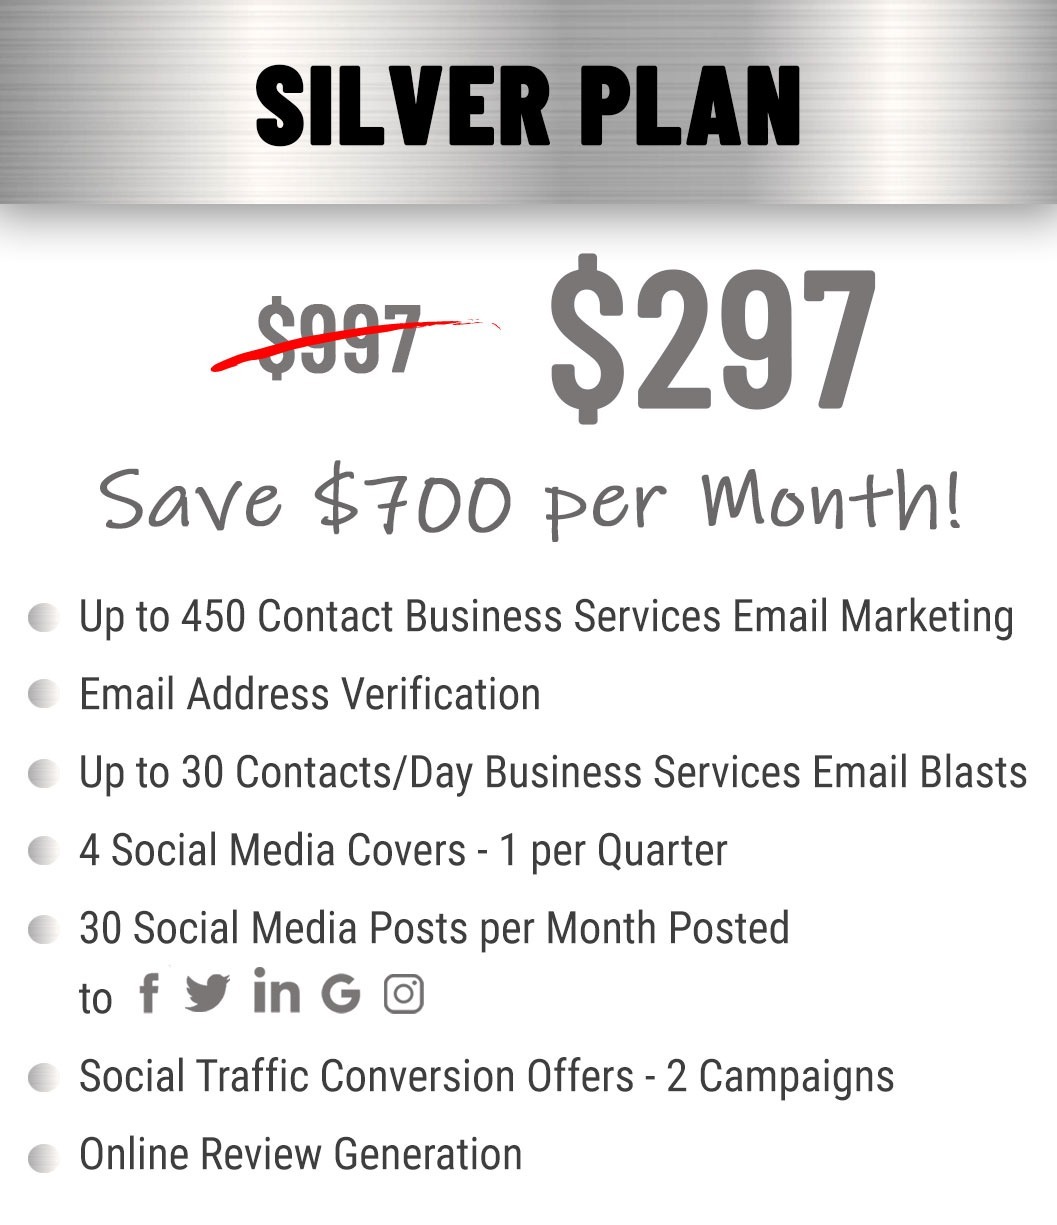 silver plan $297 per month pricing and features for business services.